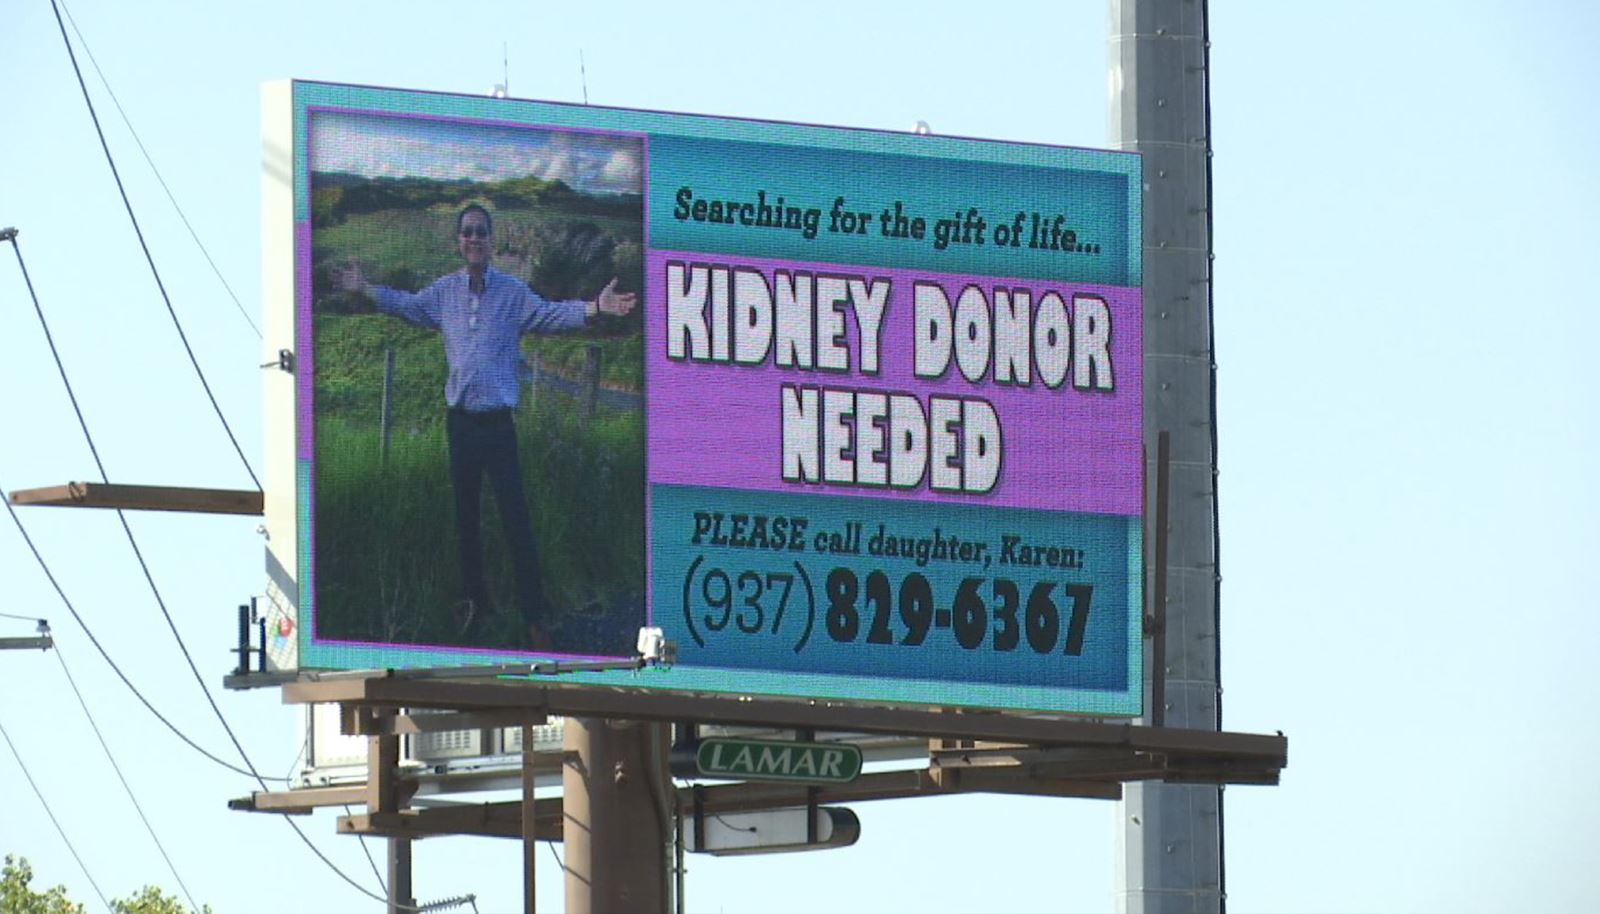 A daughter uses billboard to find kidney donor for her ailing father